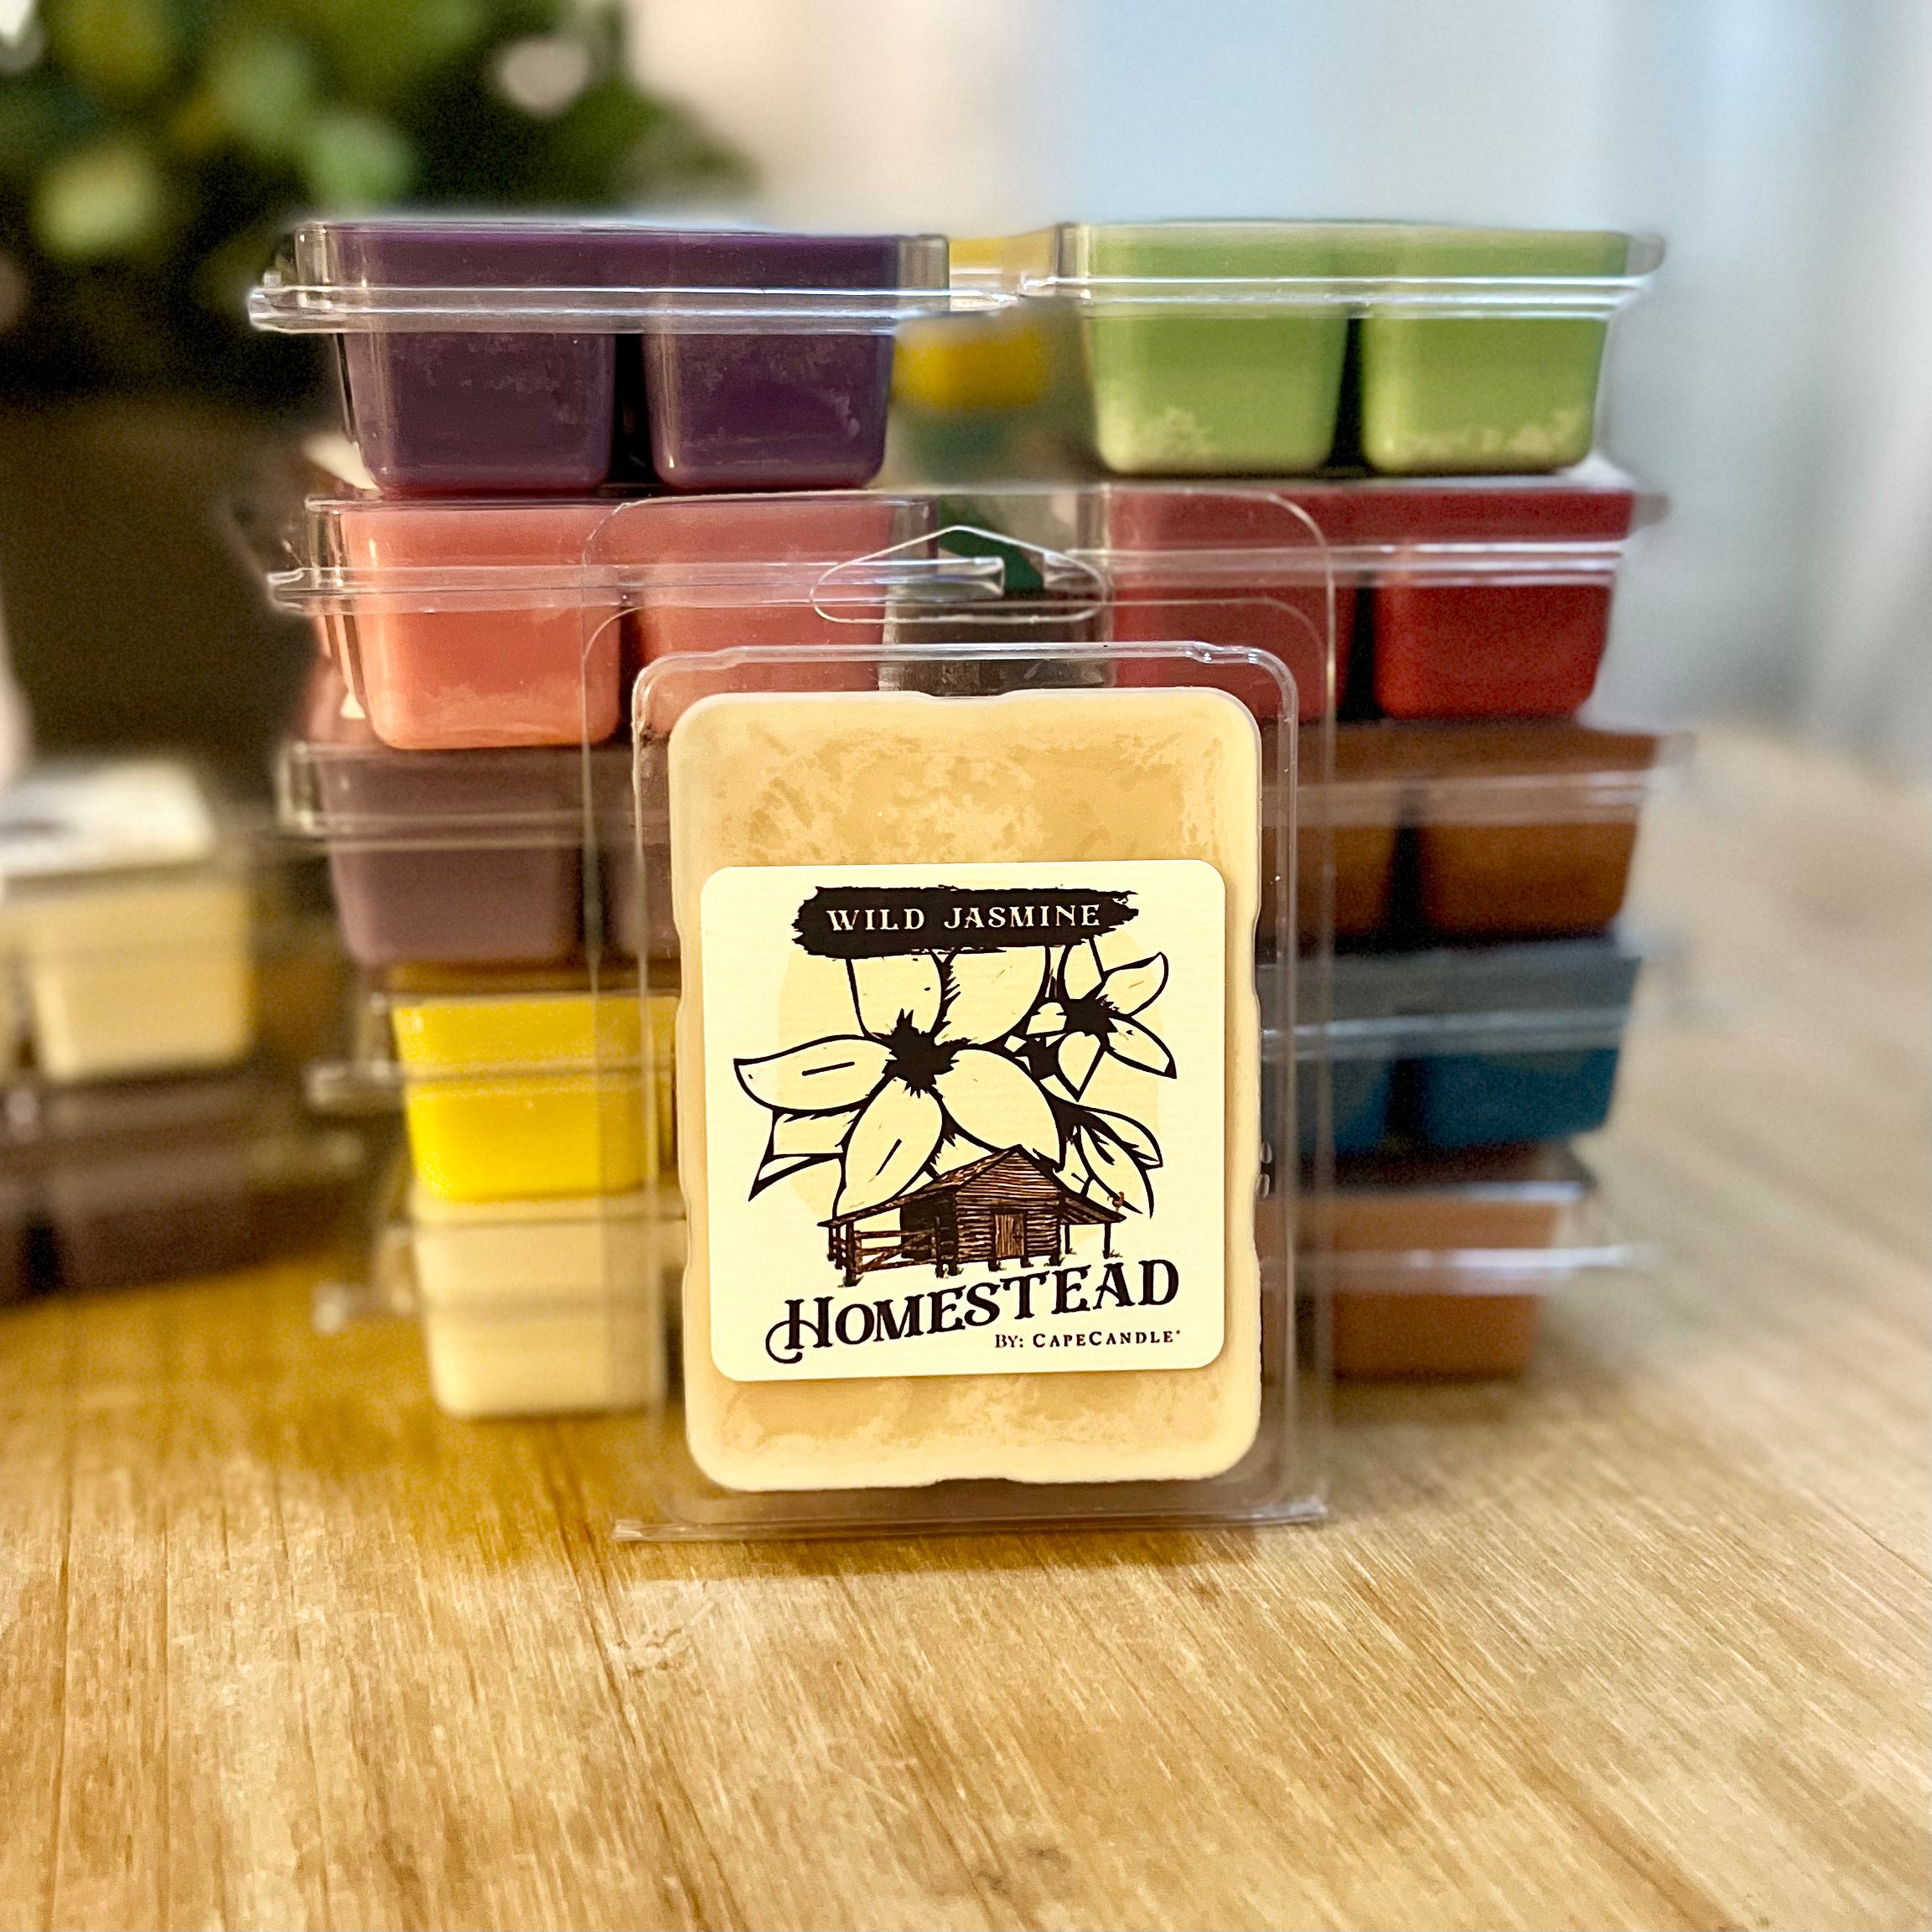 Wild Jasmine 3.5oz Homestead Soy Wax Melts by Cape Candle